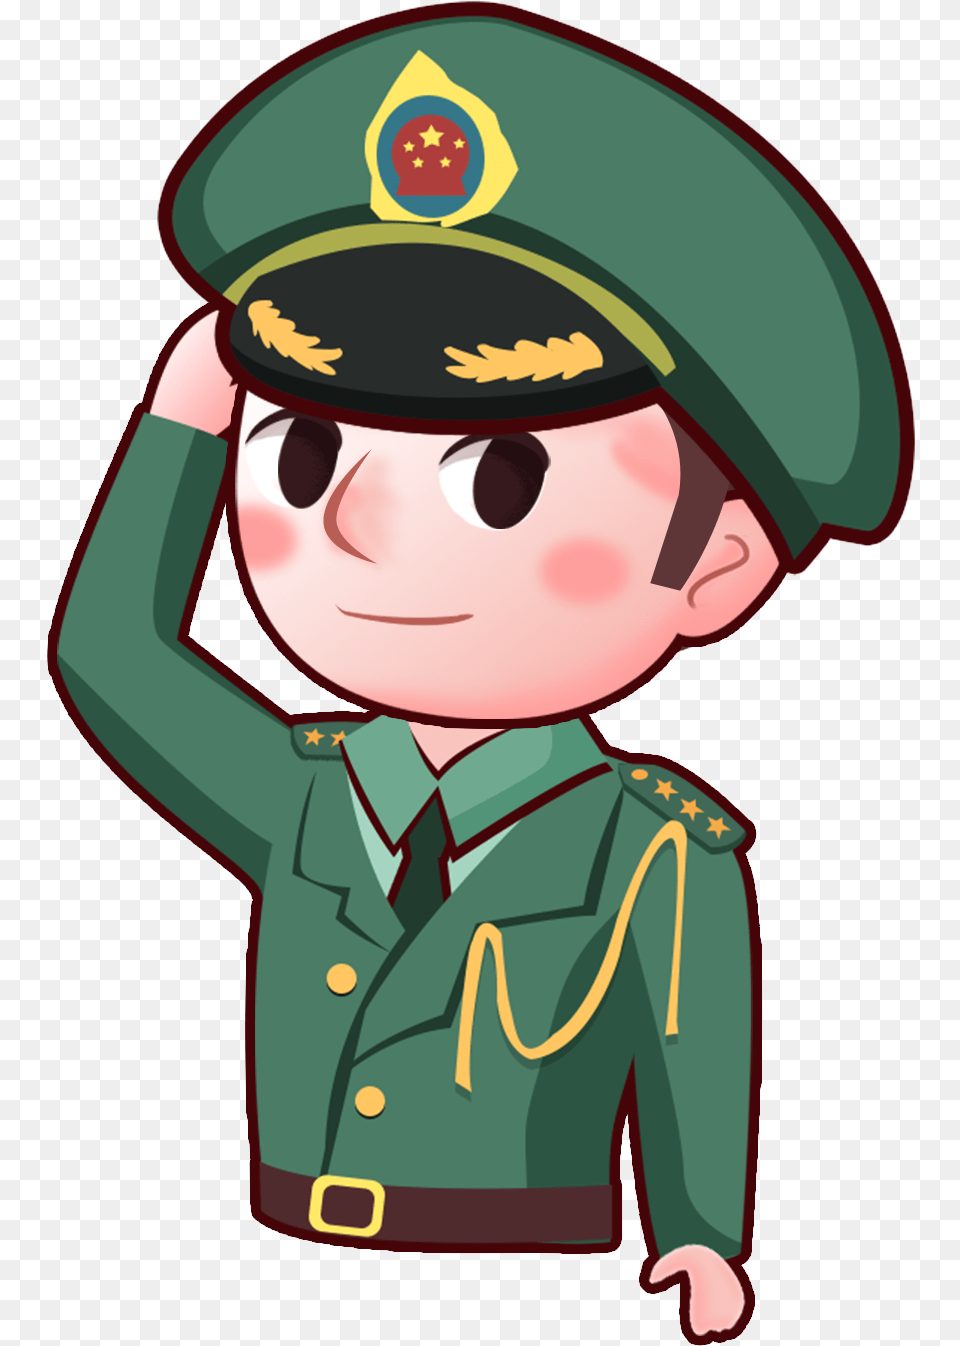 Cartoon Version Saluting Army Soldier Cartoon Images Of Soldier, Baby, Person, Military, Face Free Png Download